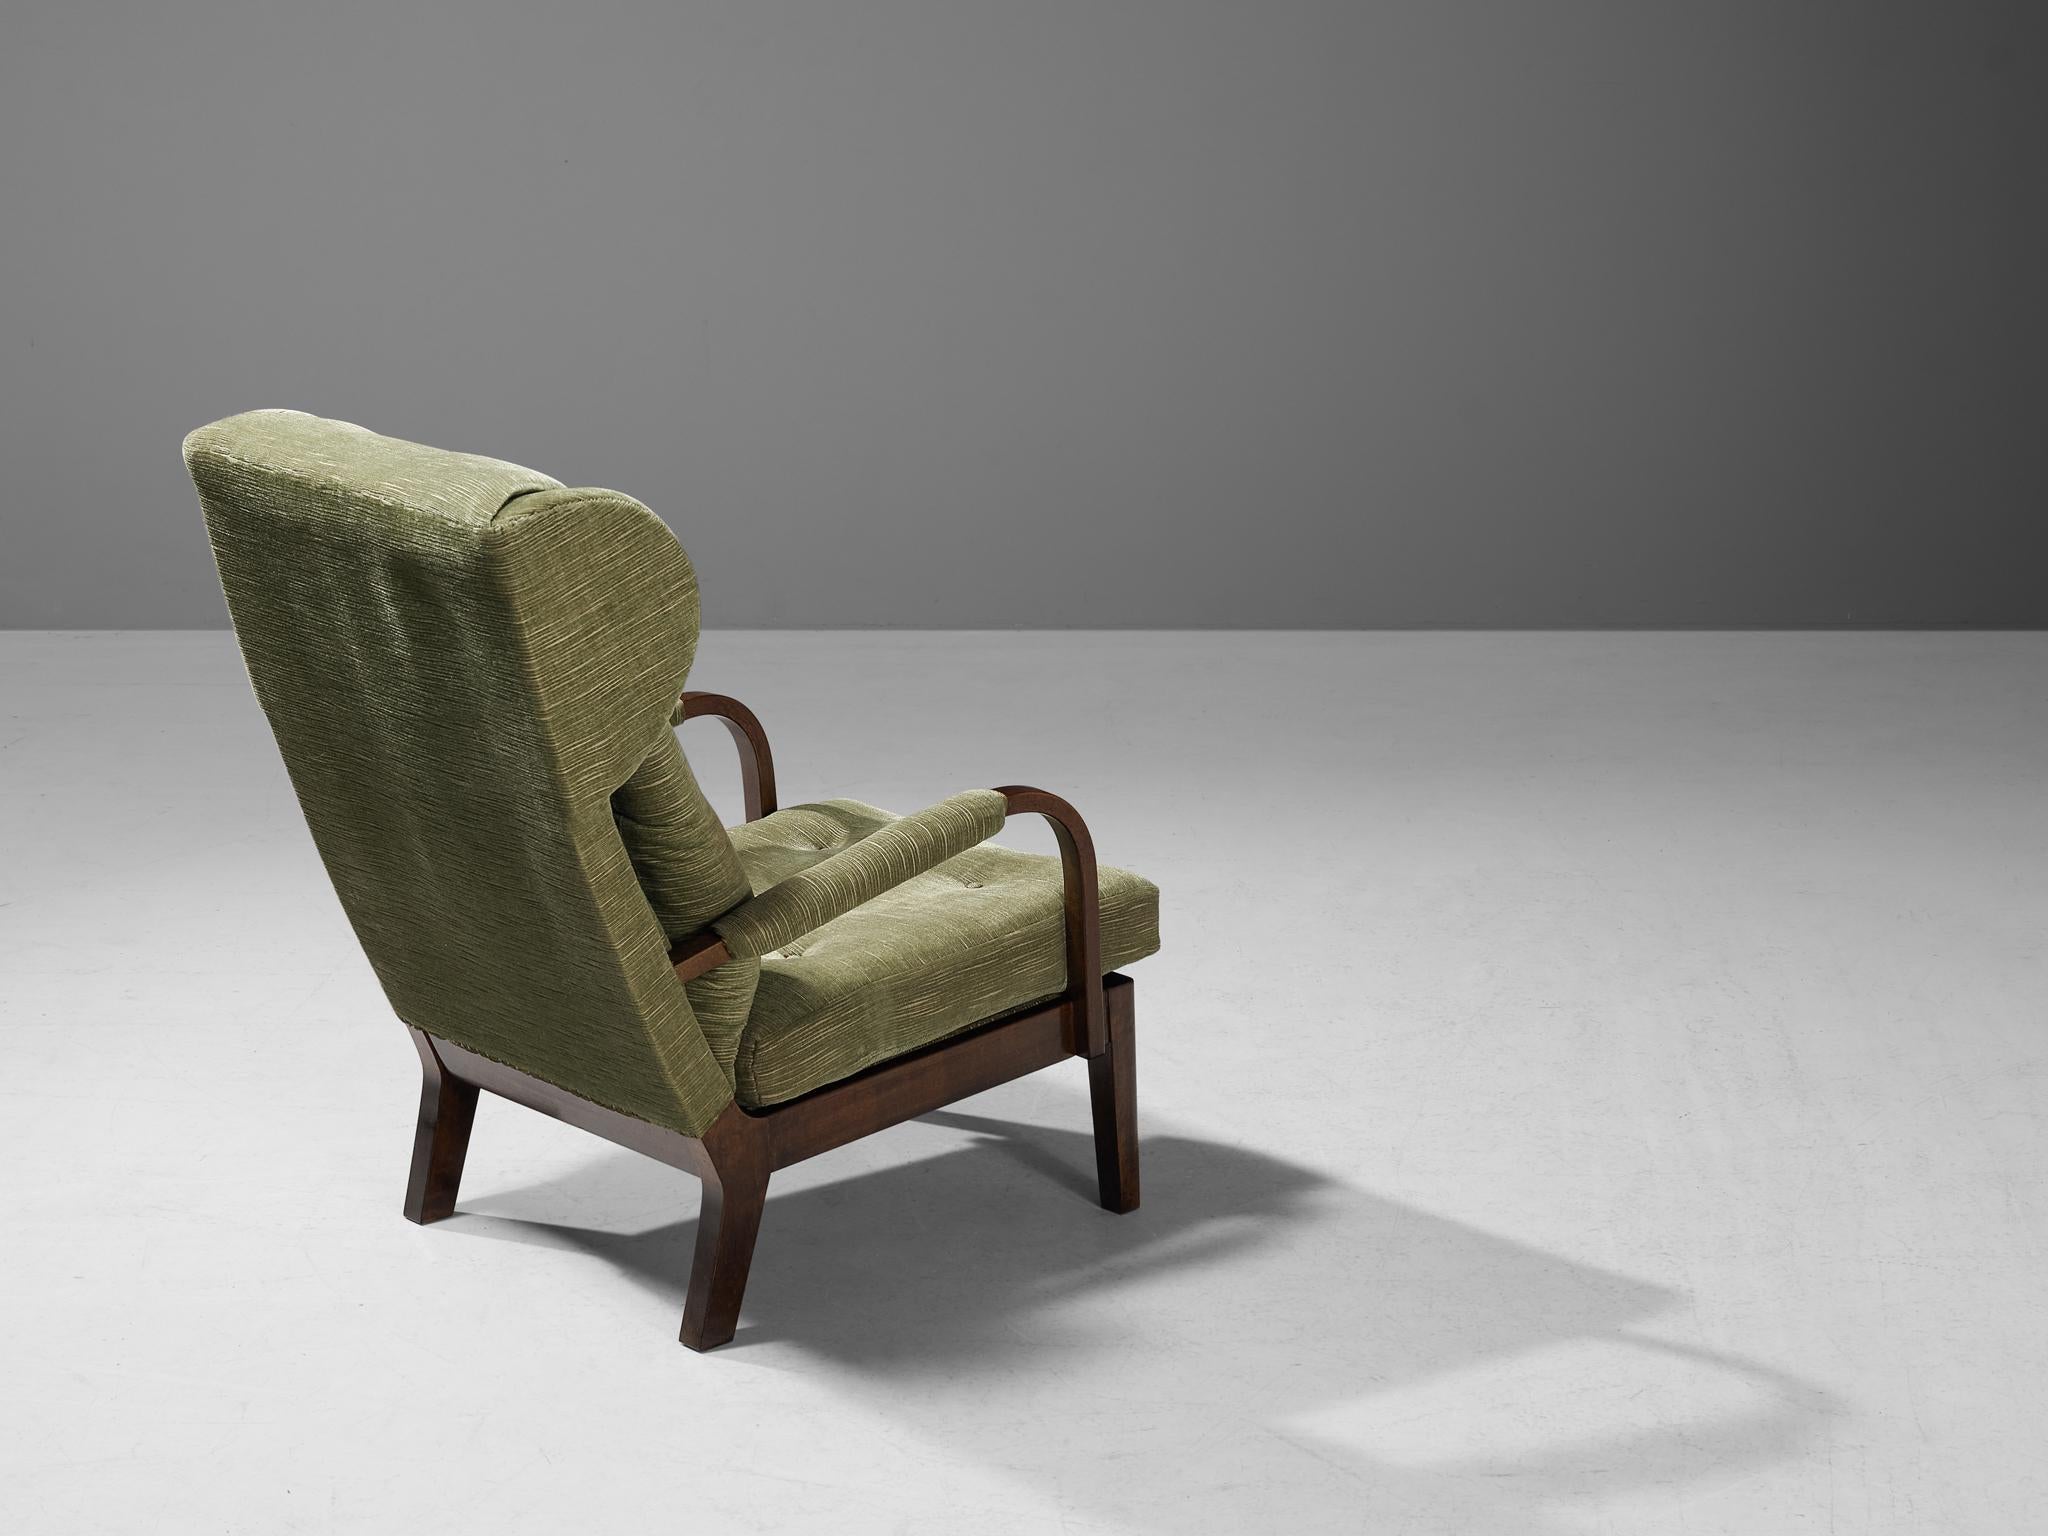 Beech 1930s Swedish Easy Chair in Olive Green Upholstery For Sale